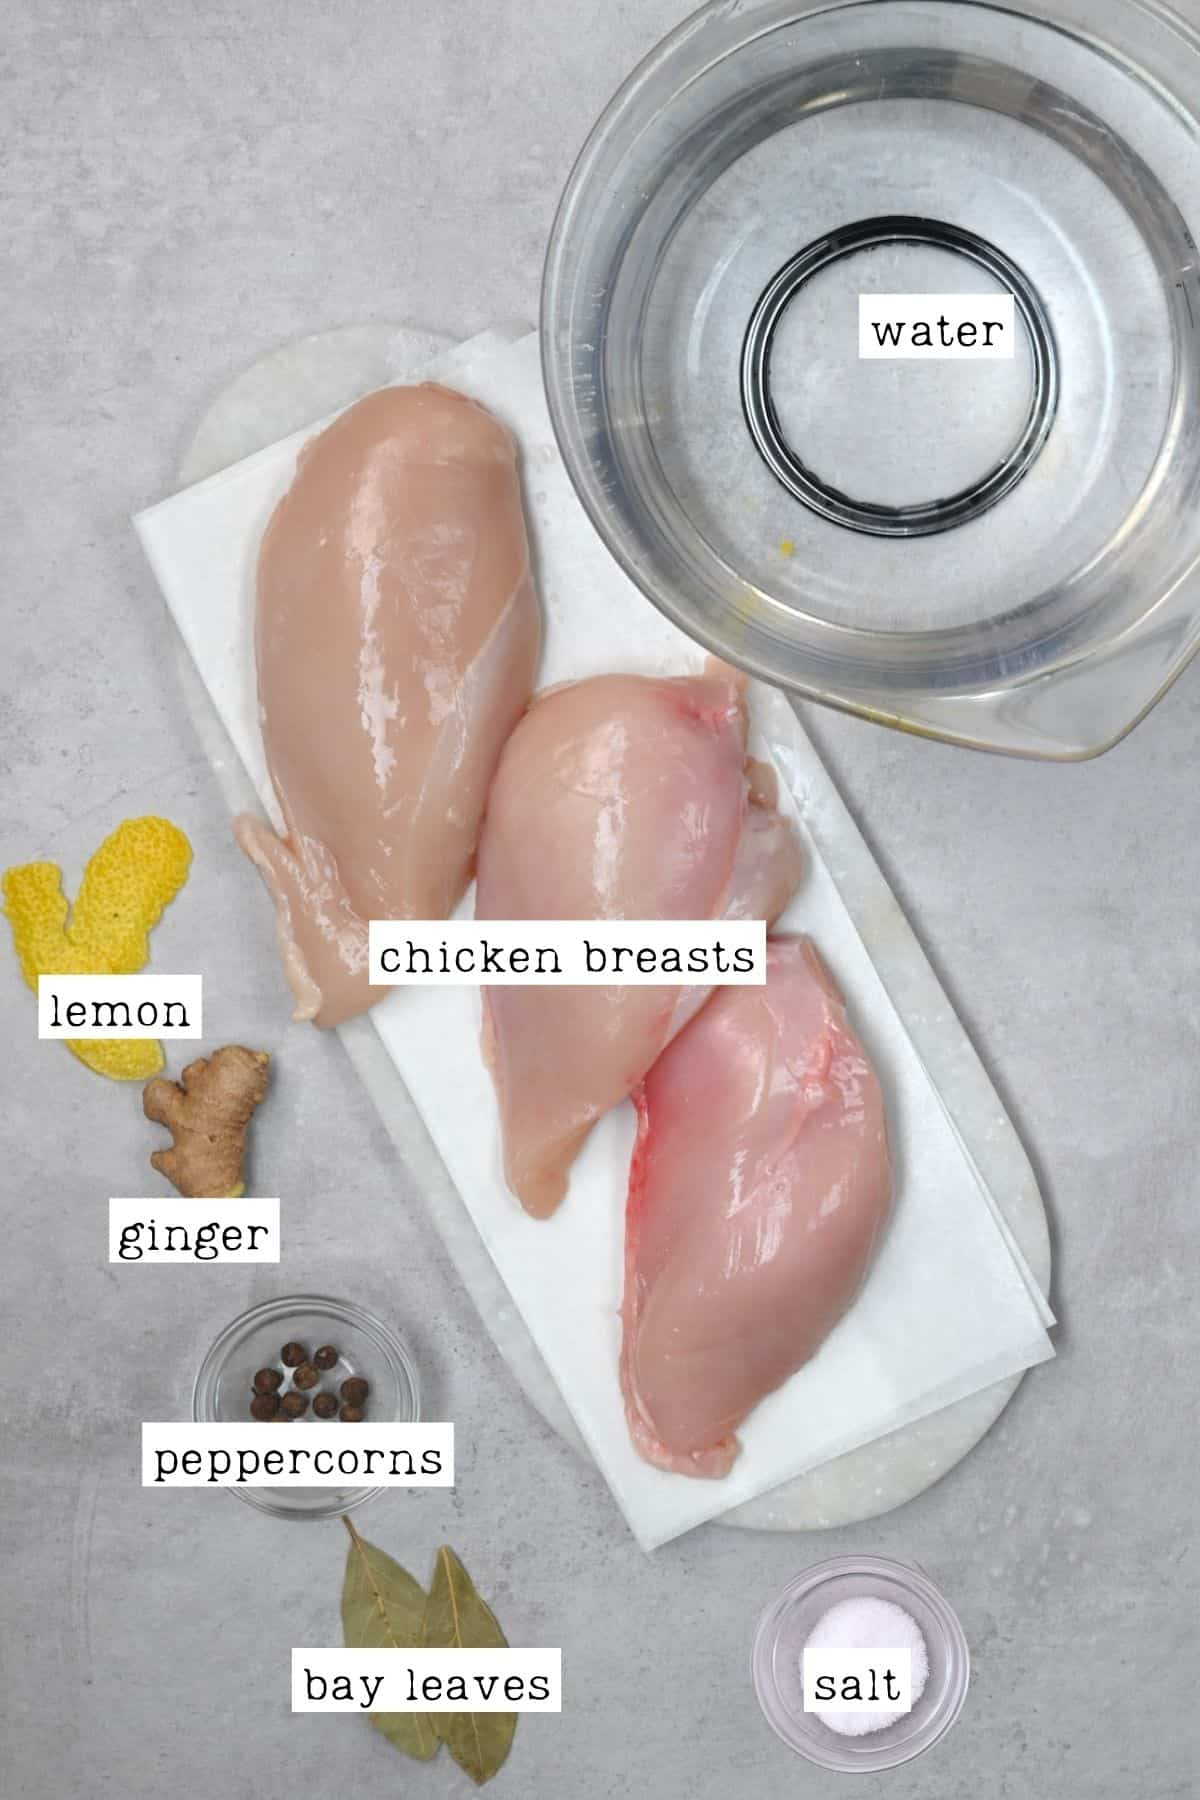 Ingredients for boiling chicken